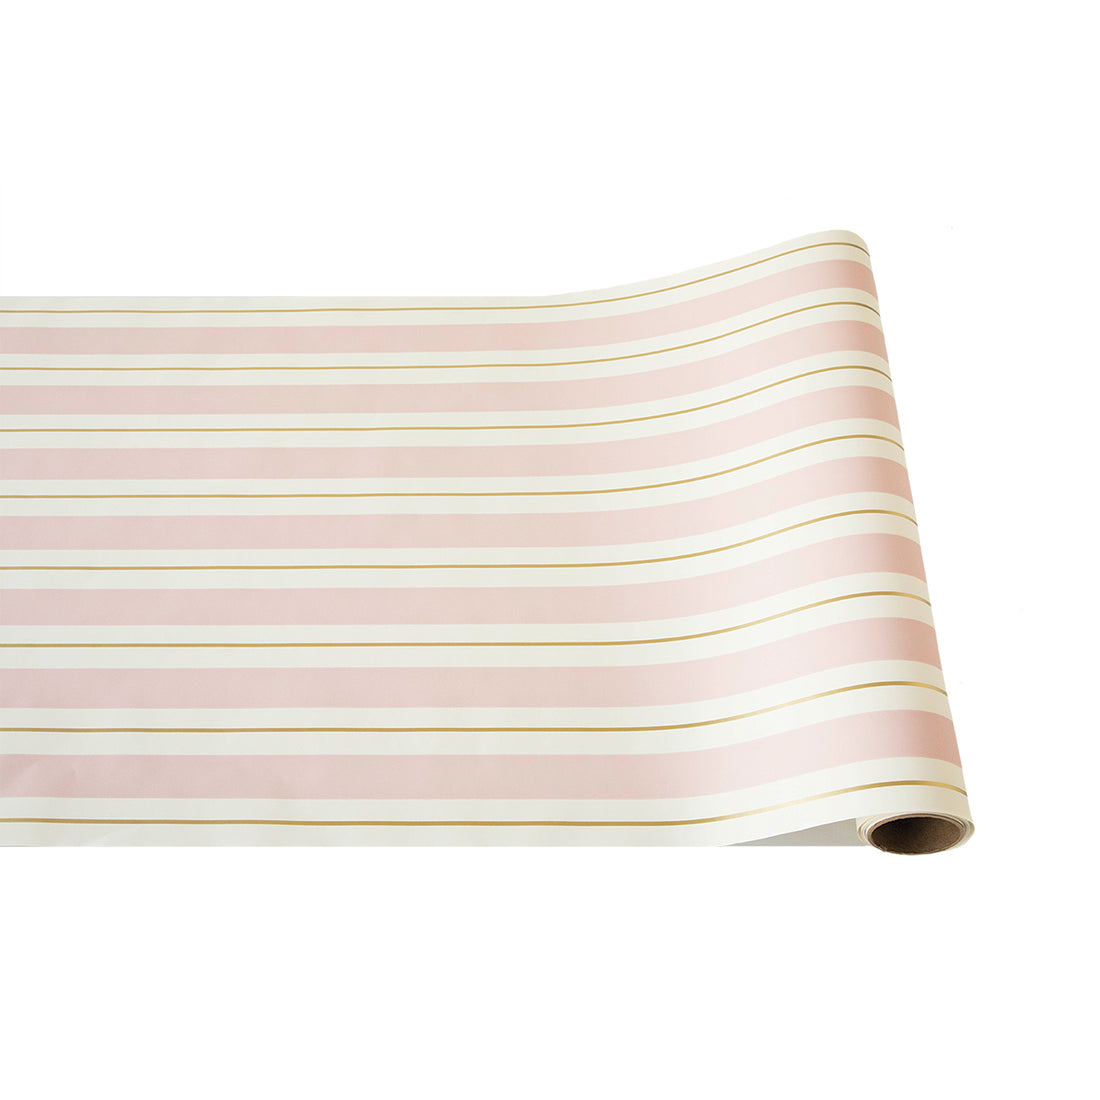 A runner with thick light pink and white stripes running the length of the roll, with a thin gold line down the middle of each white stripe.